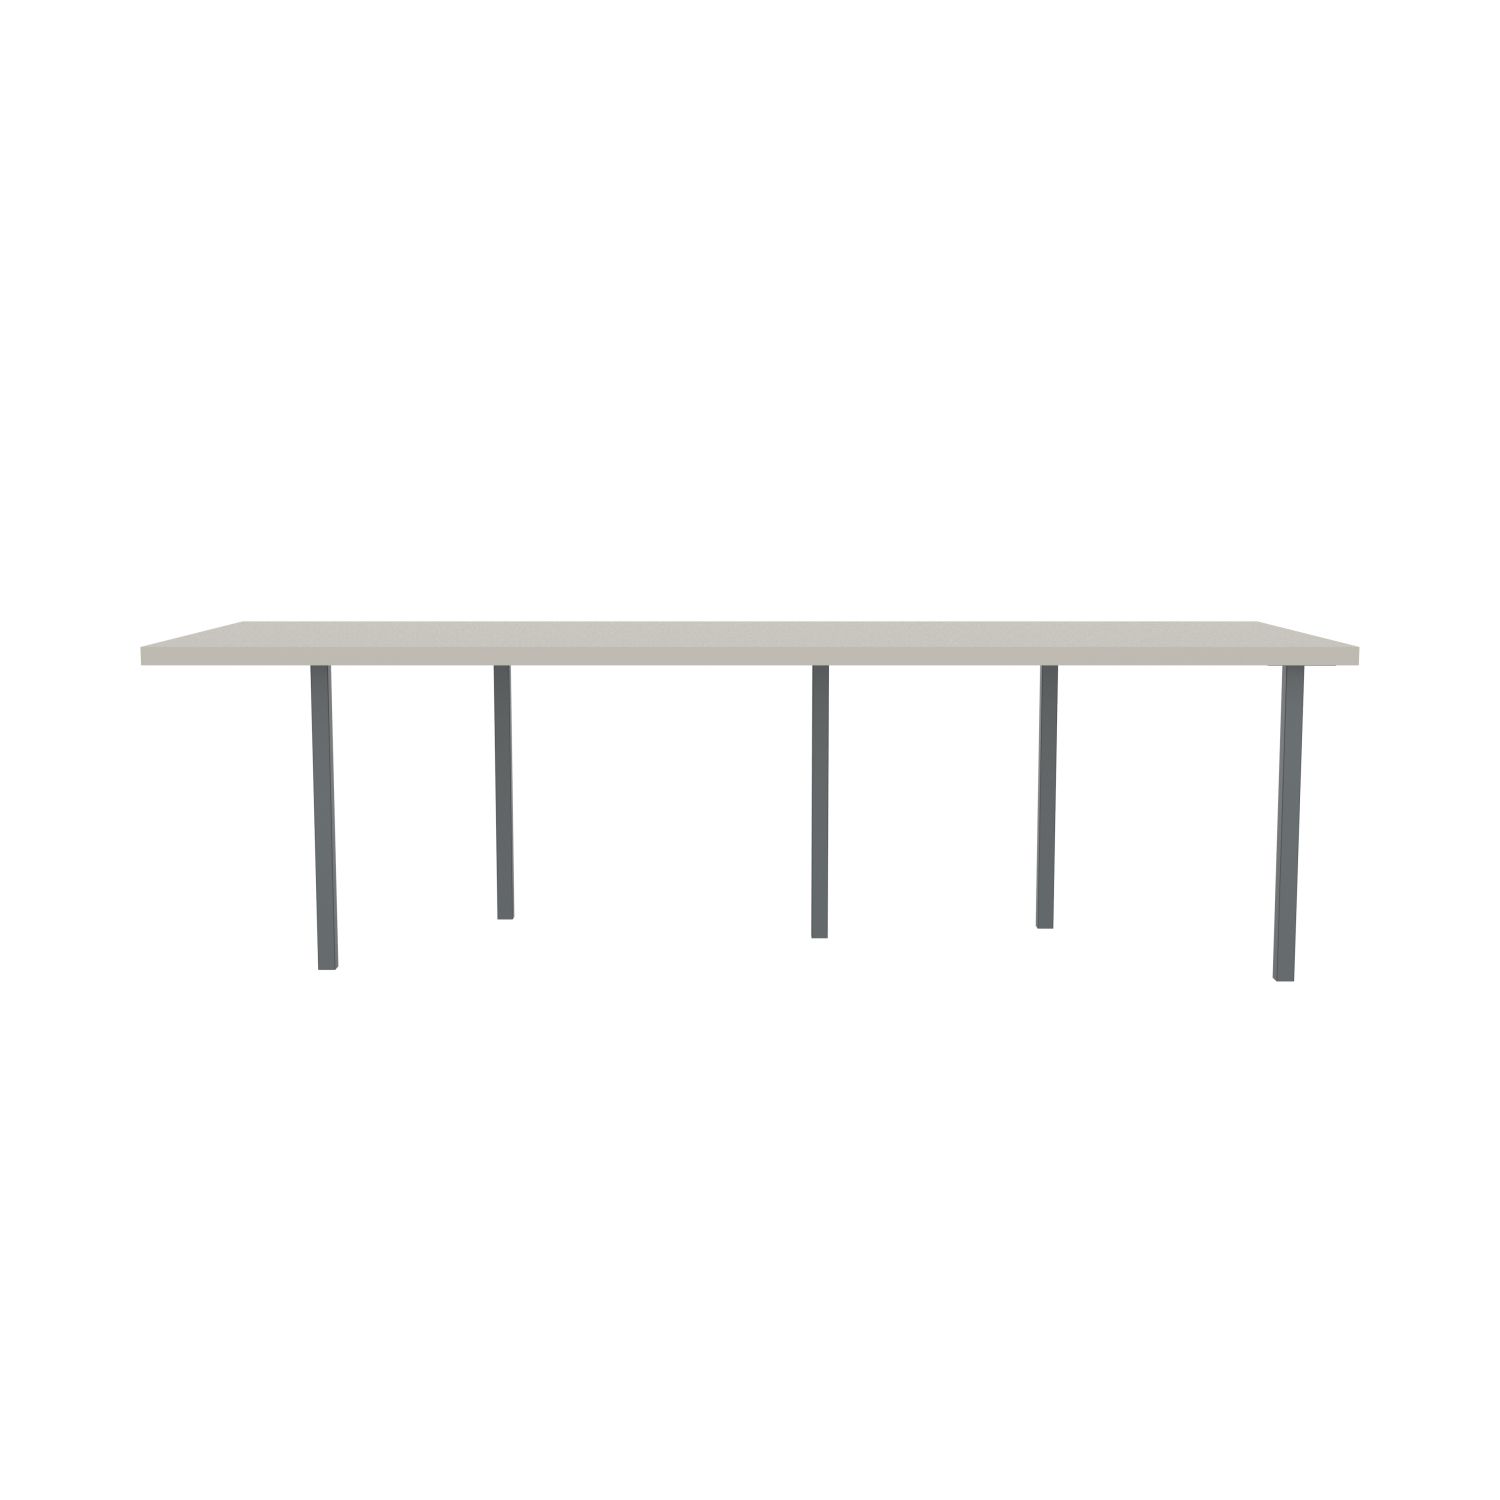 lensvelt bbrand table five fixed heigt 915x264 hpl white 50 mm price level 1 dark grey ral7011